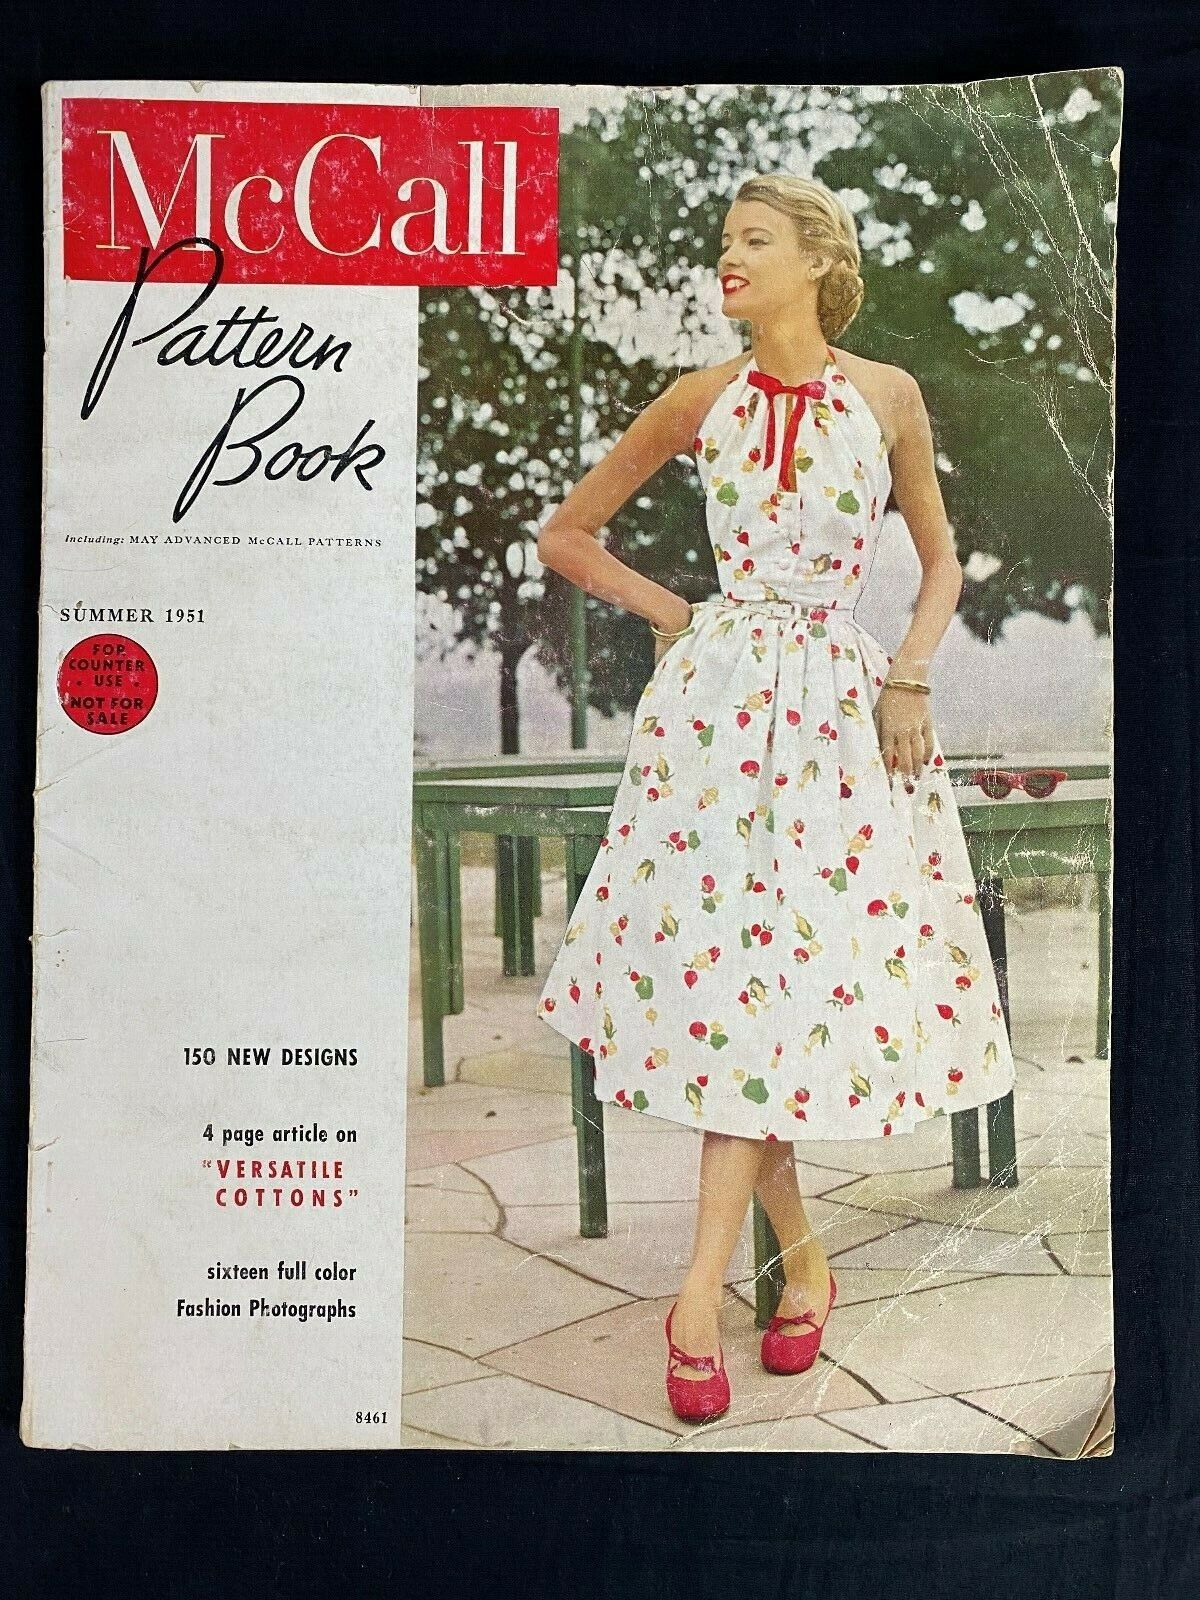 VINTAGE VALUABLE ULTRA RARE UNCIRCULATED MCCALL PATTERN BOOK SUMMER 1951